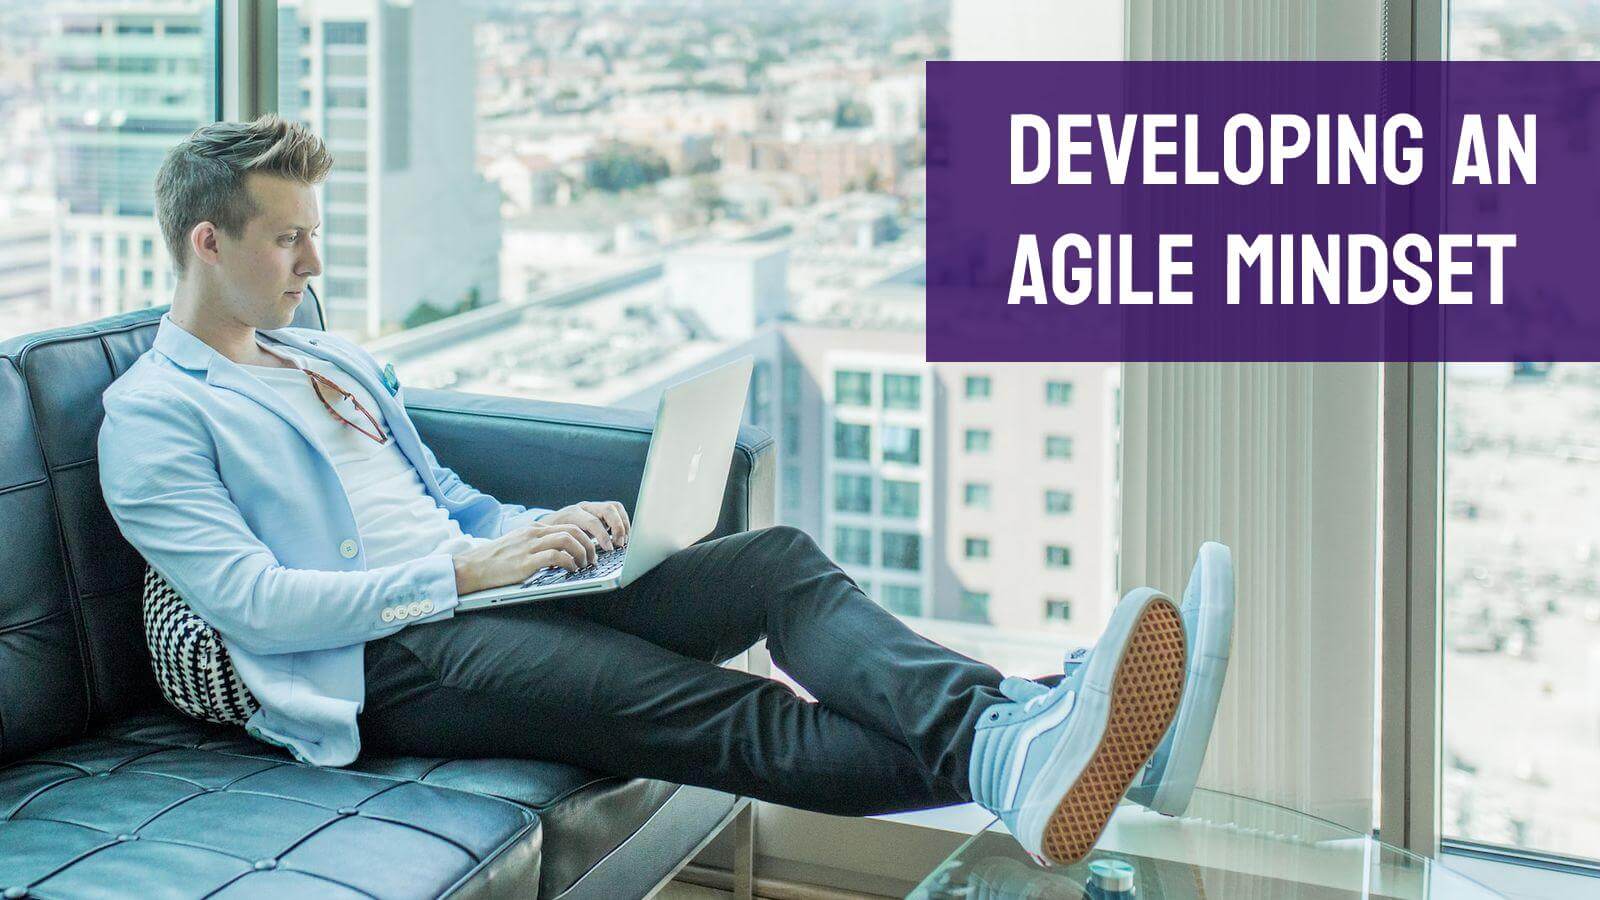 What is the Agile mindset and how to develop it? How is it different from Lean and Growth mindsets?